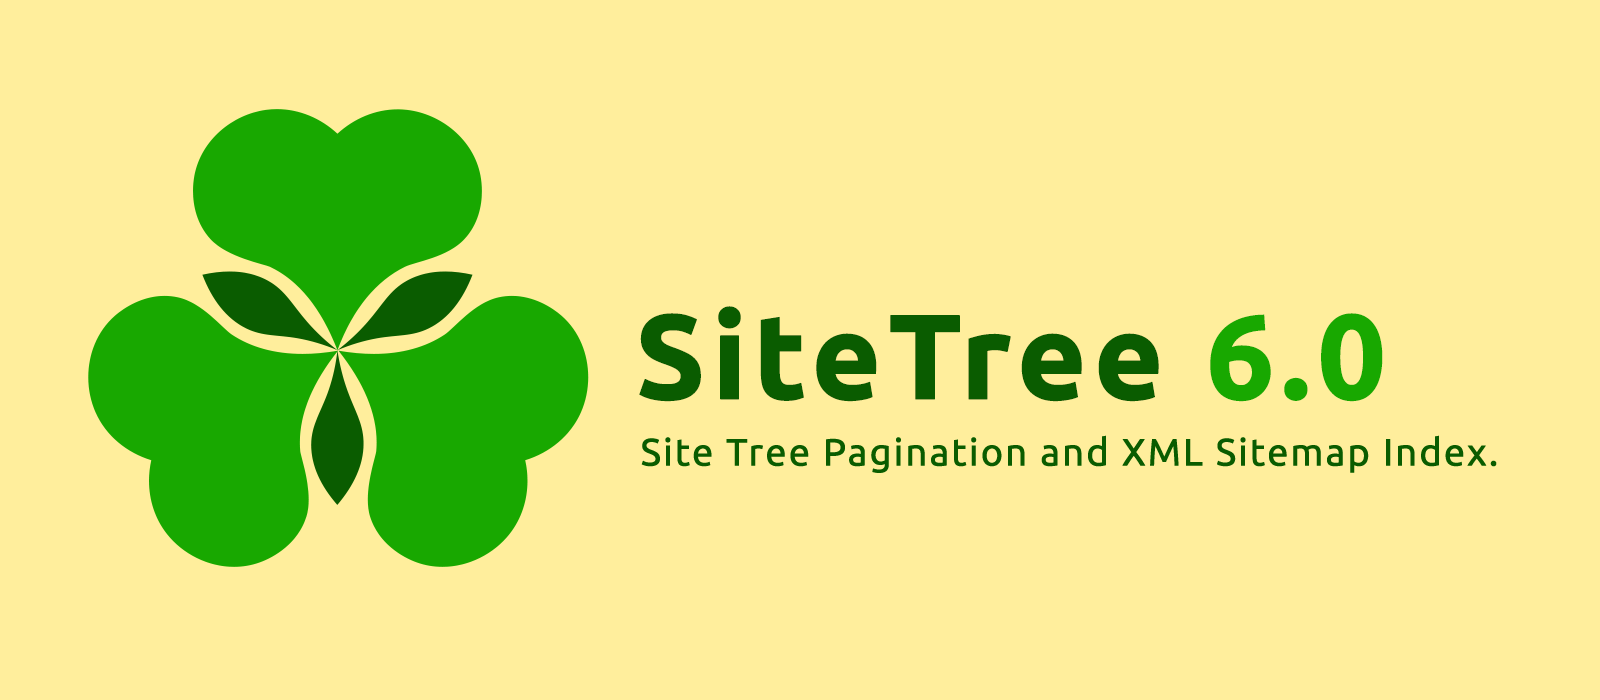 SiteTree 6.0: Site Tree Pagination and XML Sitemap Index